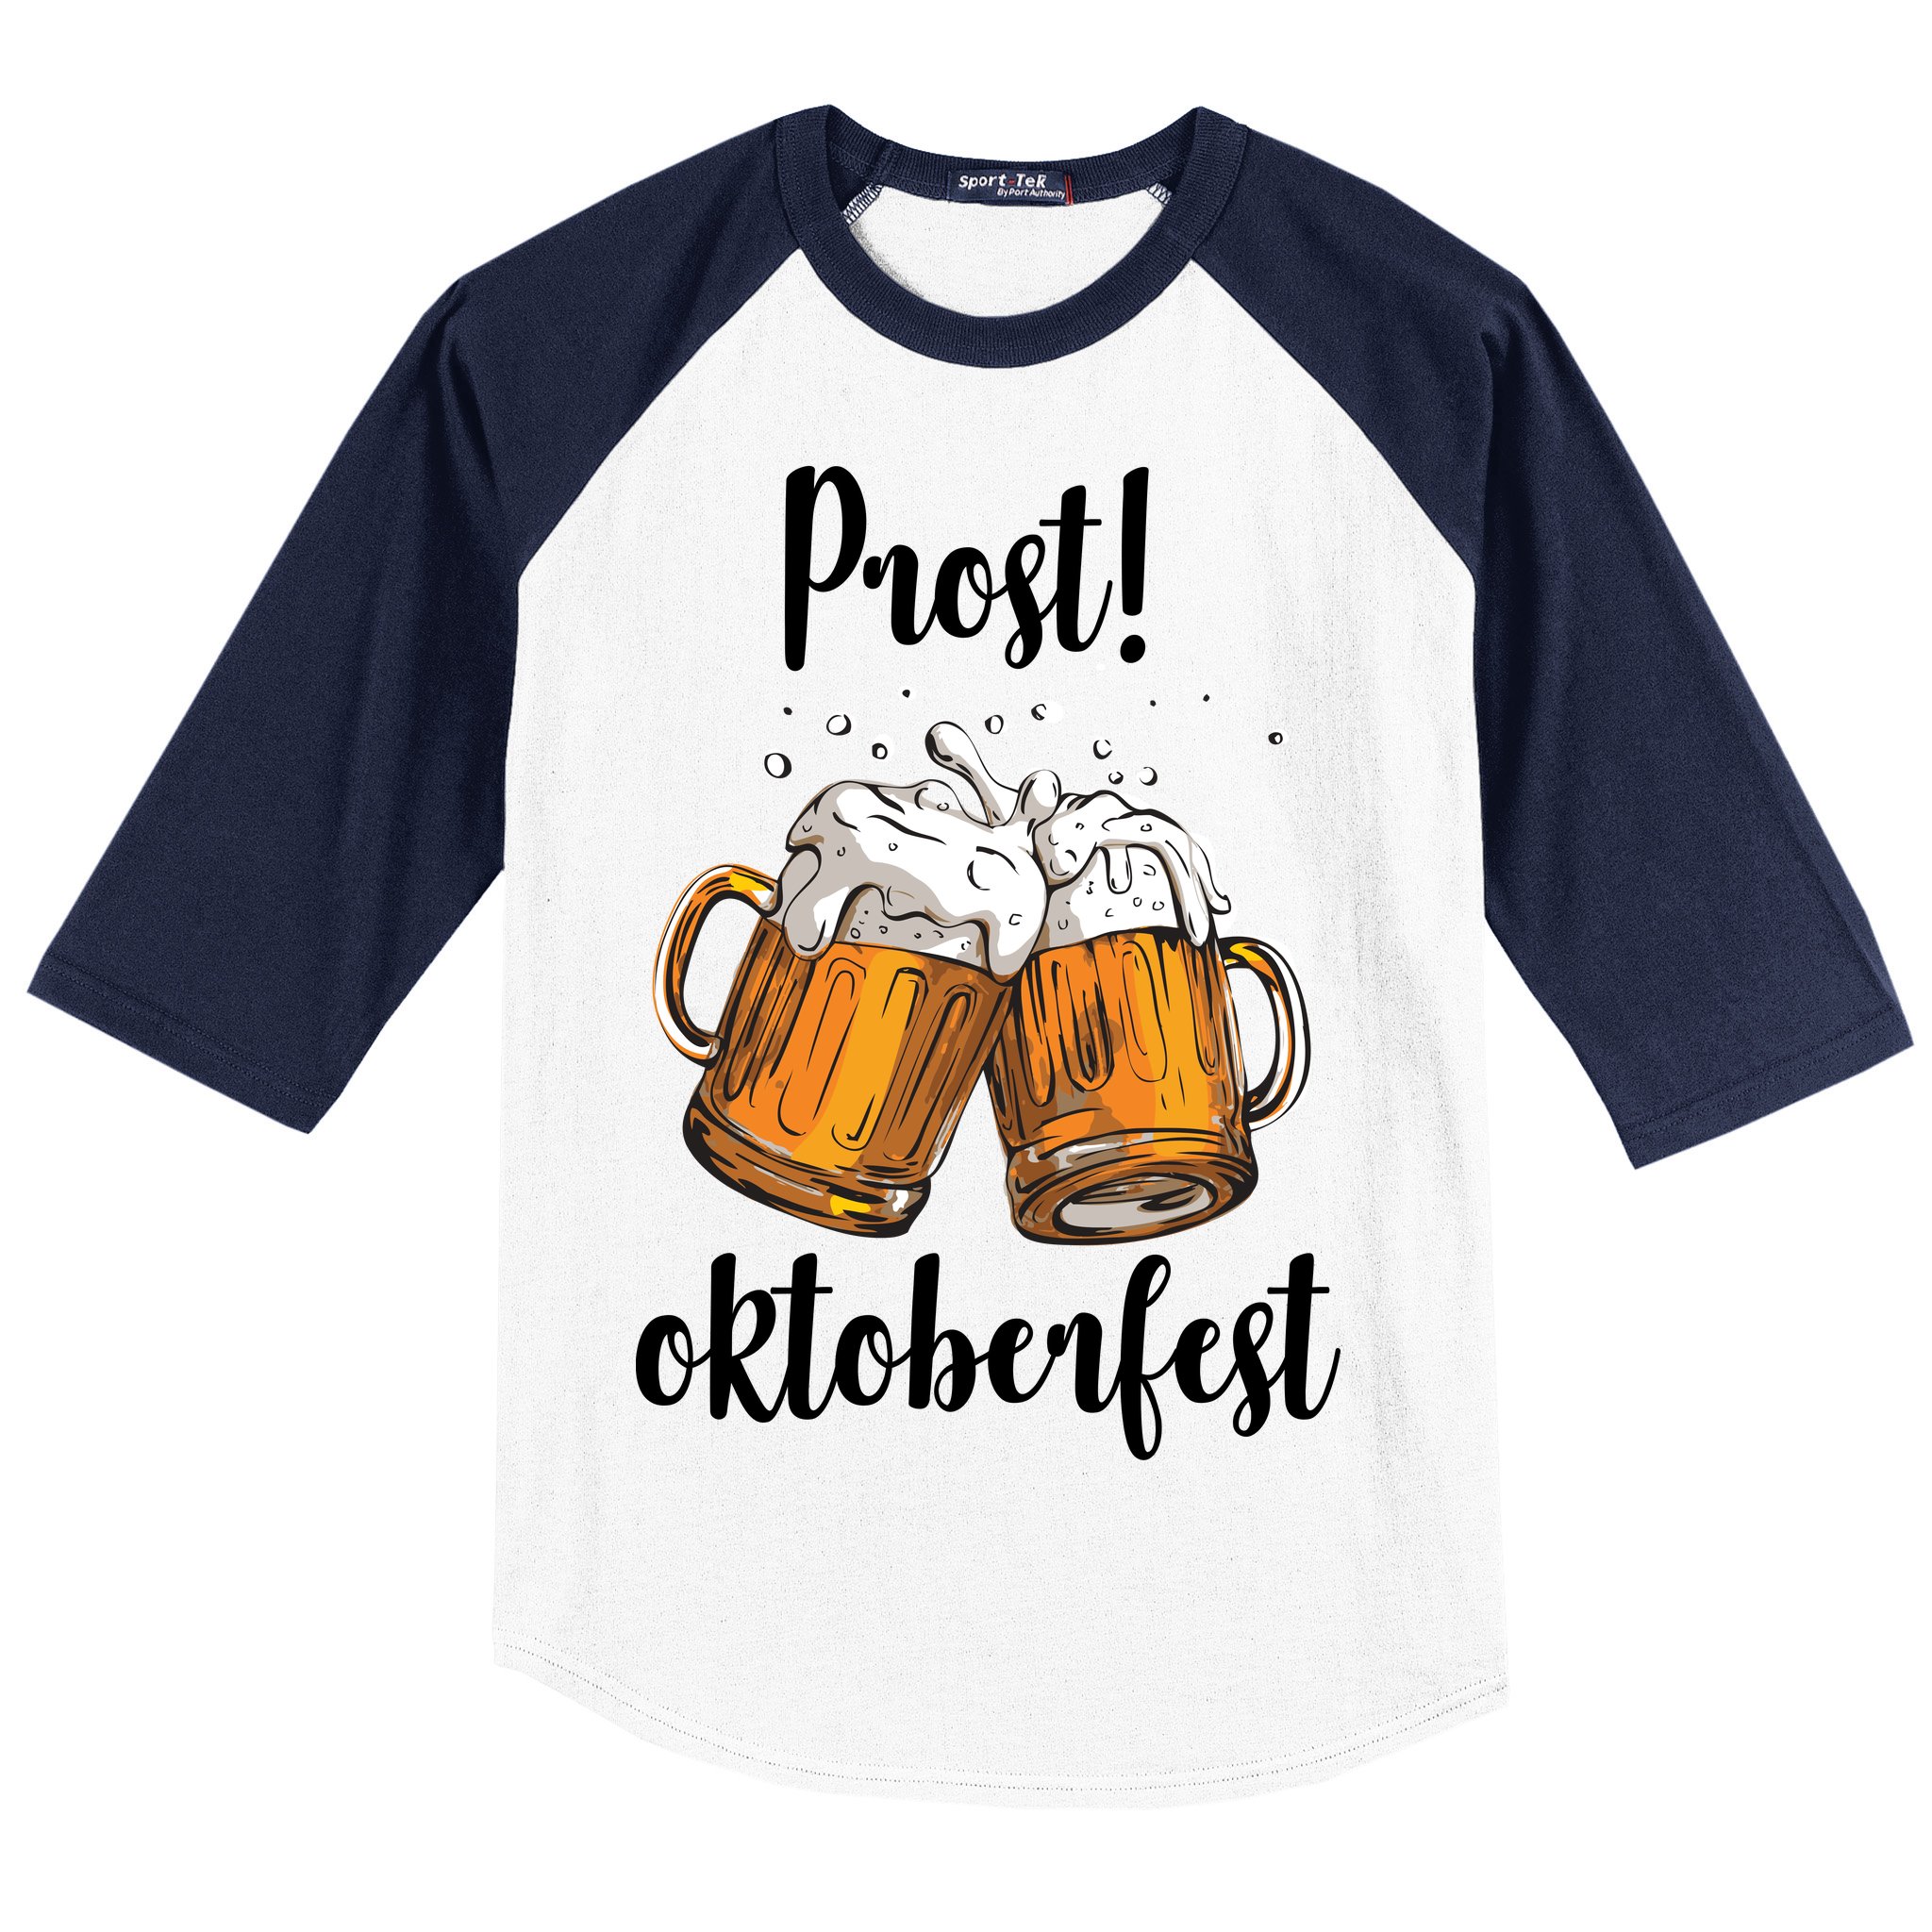 Beer Shirt If You're Hoppy And You Know It Drink Your Beer Oktoberfest Shirt